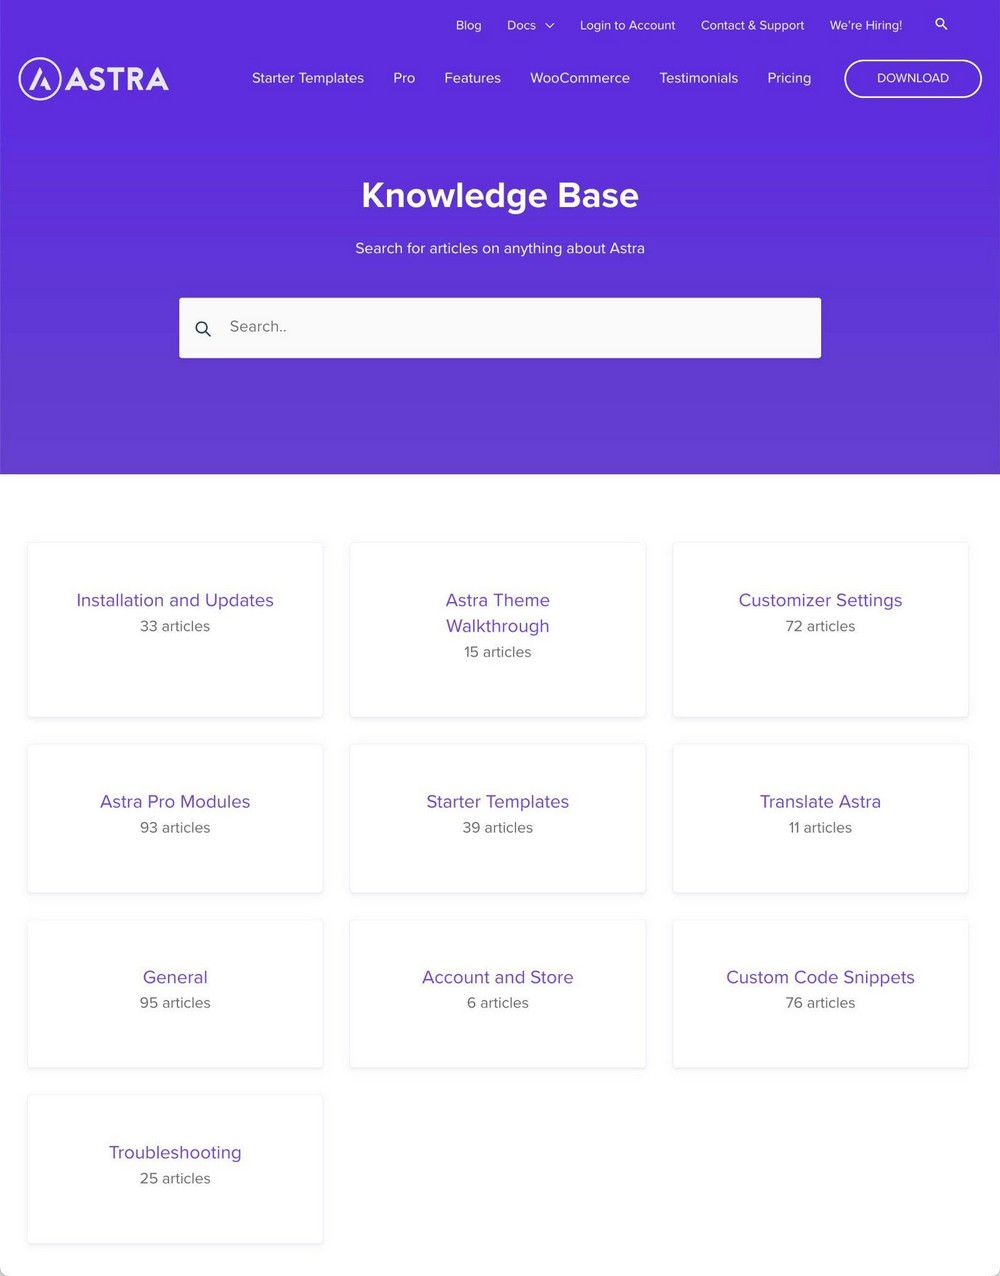 Astra Knowledge base